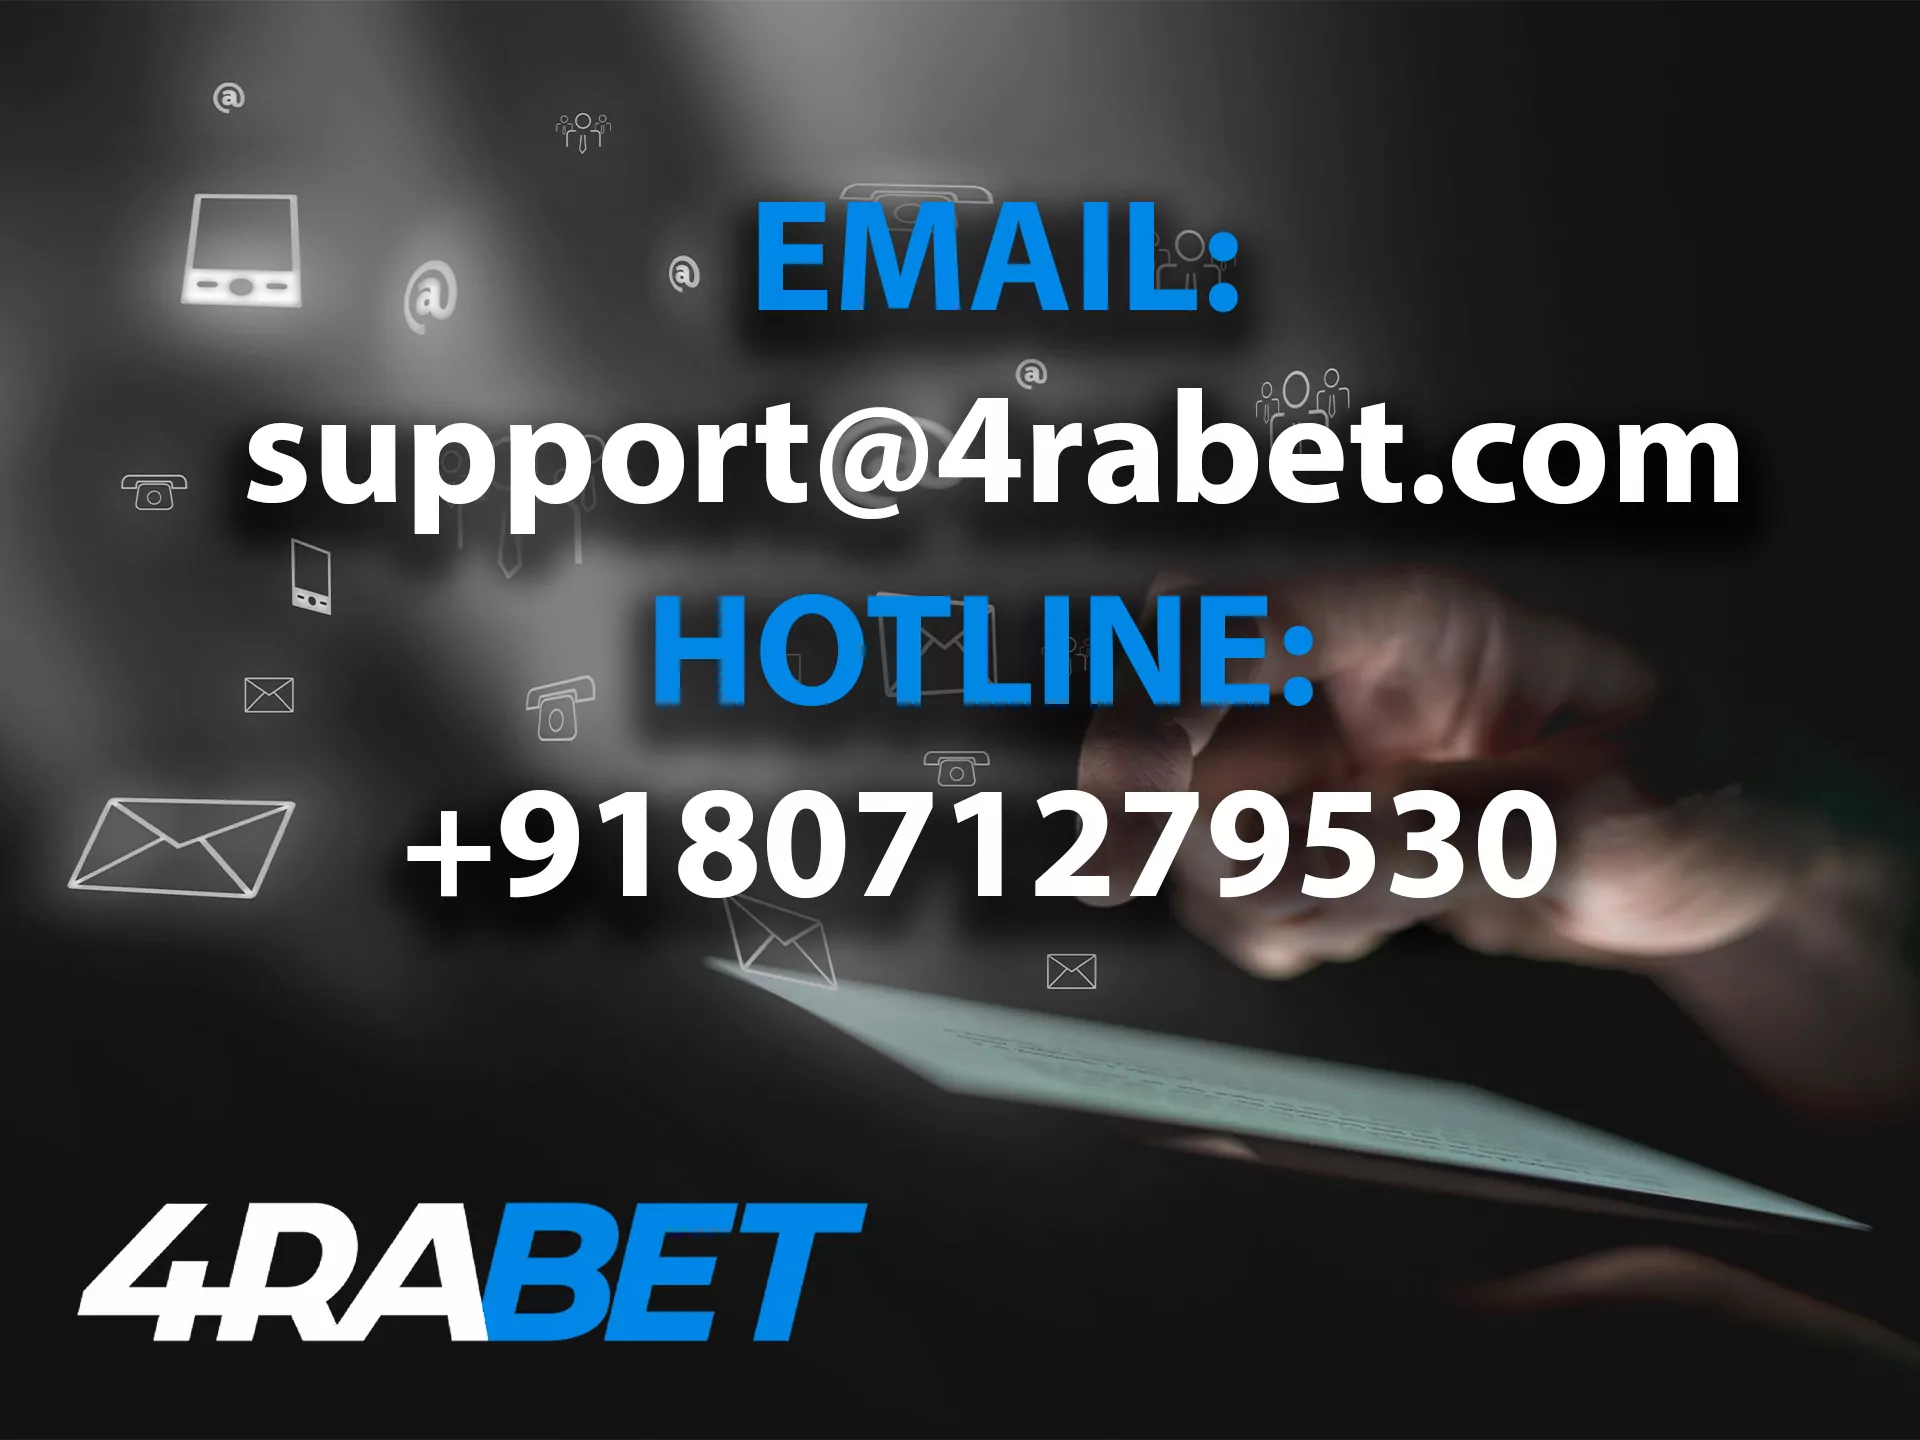 You can contact 4rabet team any way. that is more convenient for you.